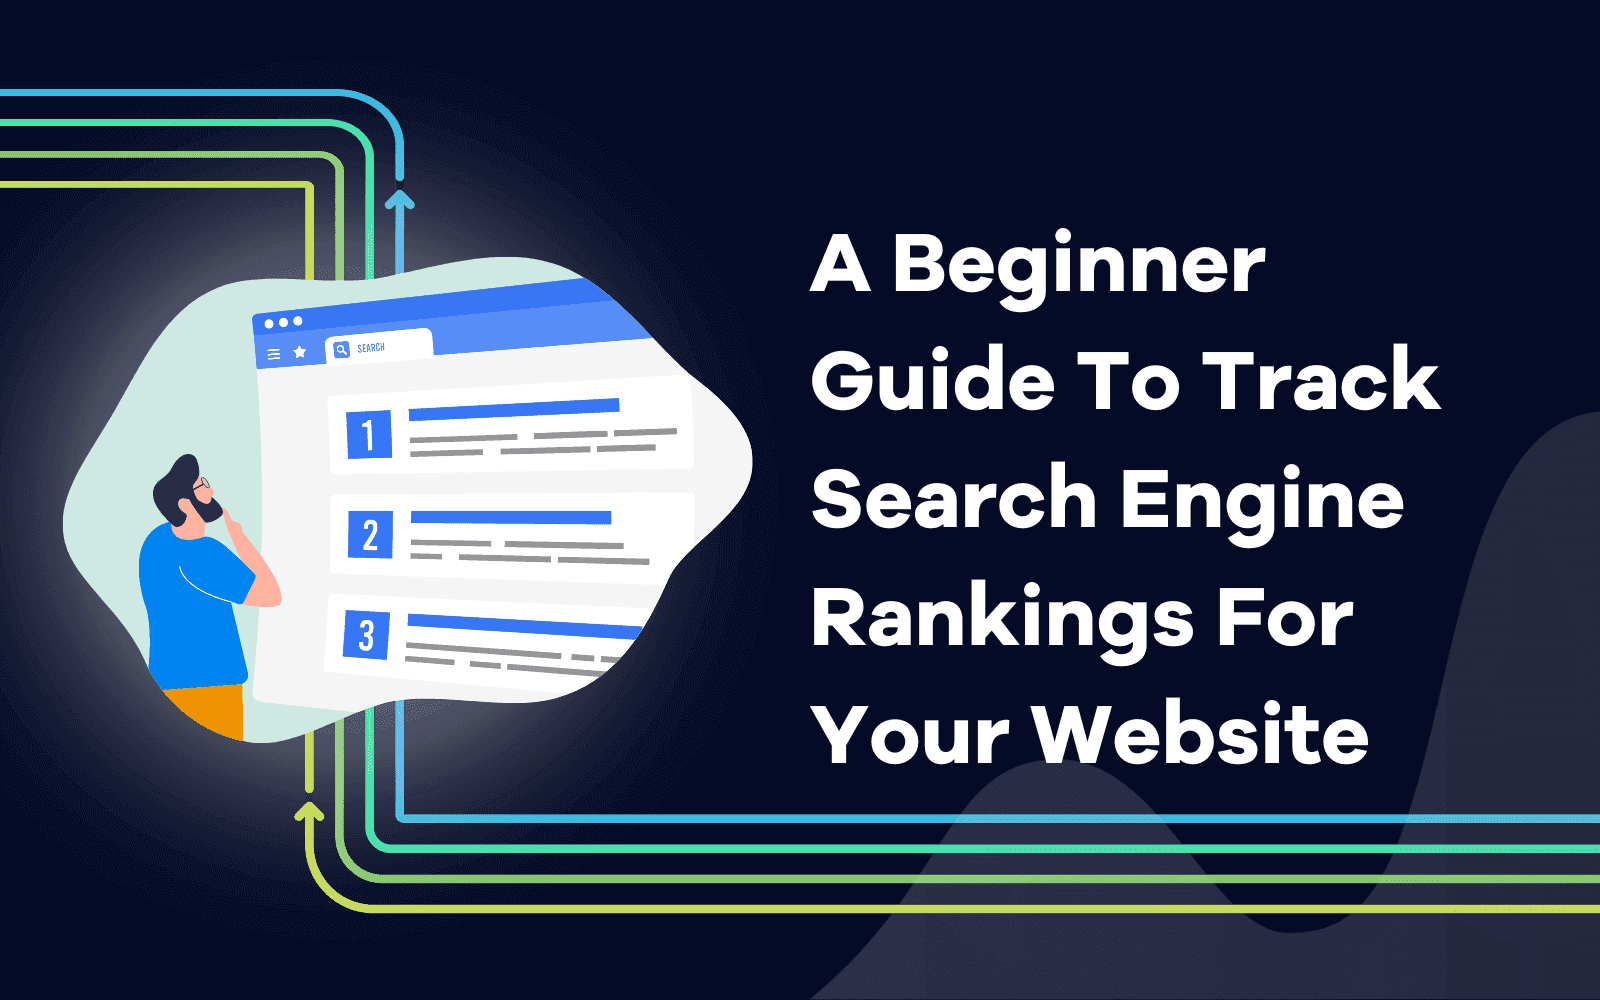 Beginner Guide To Track Search Engine Rankings For Your Website